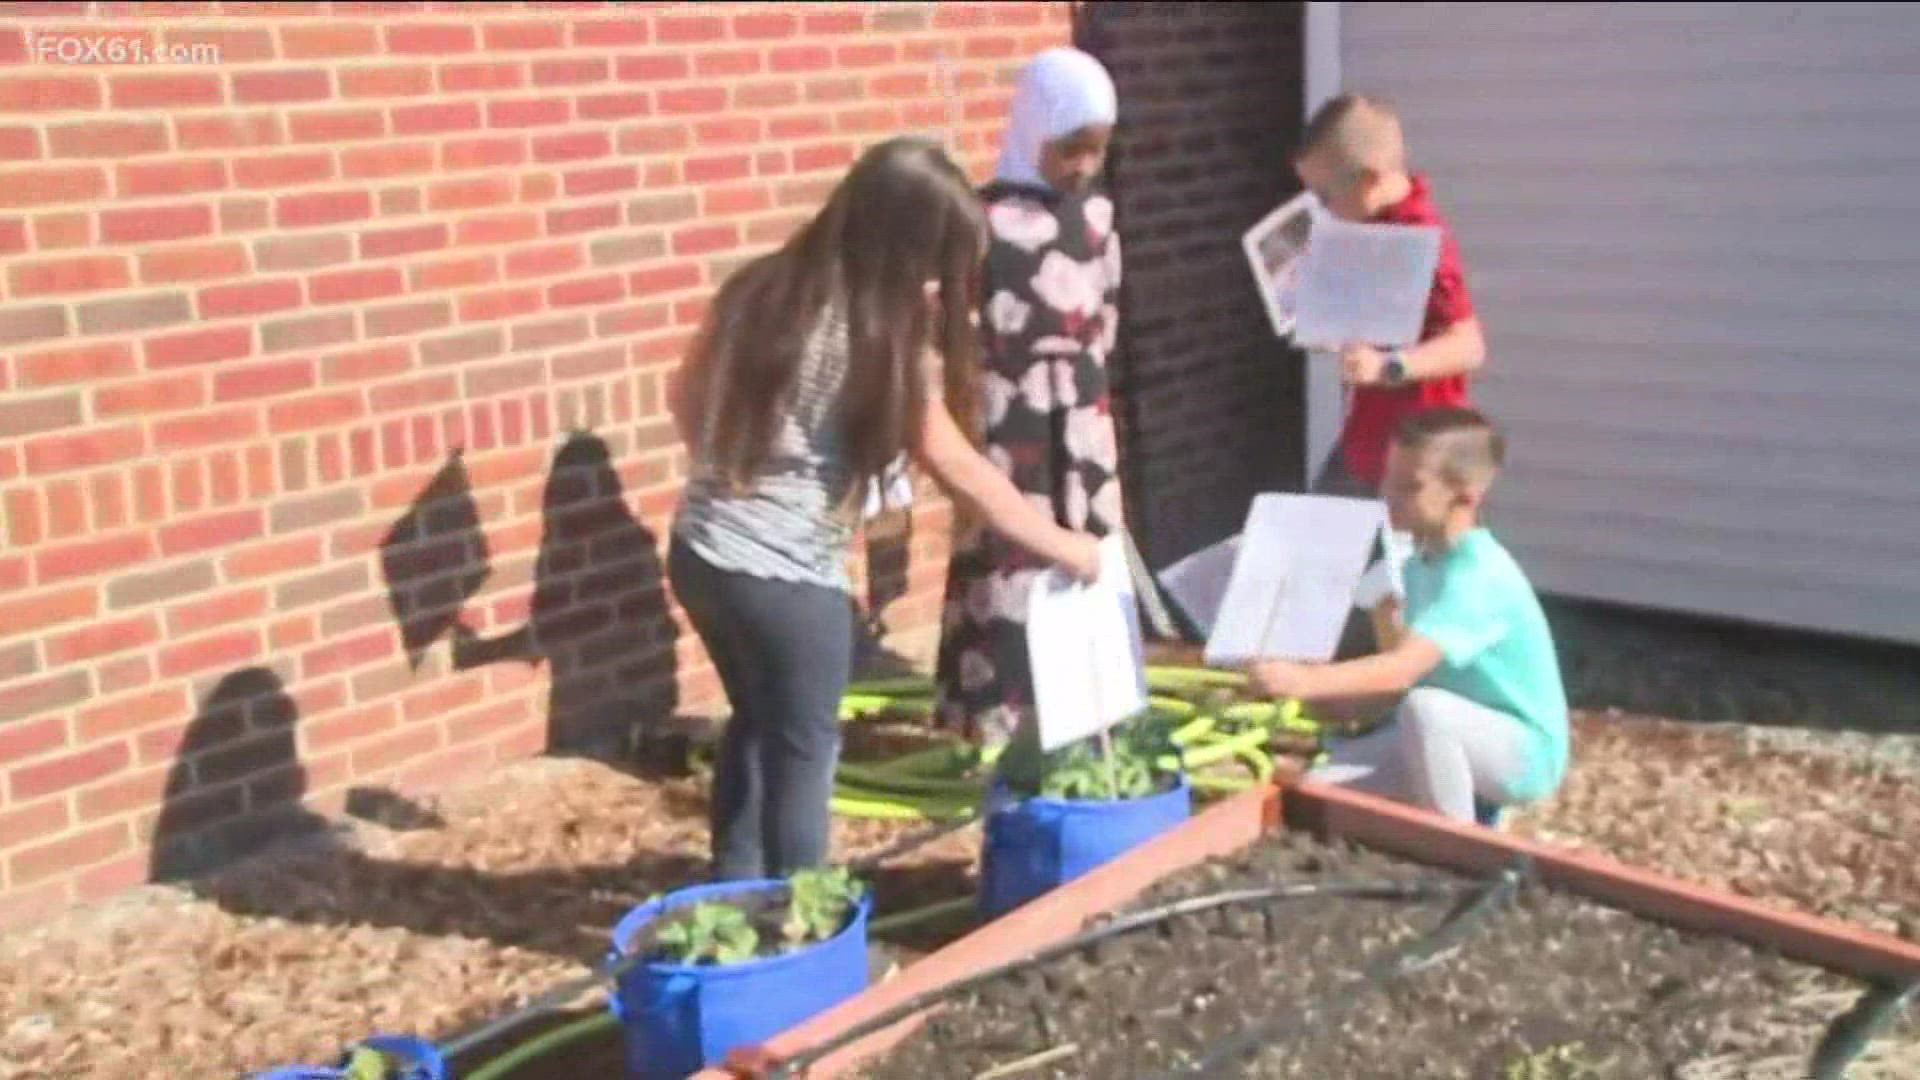 Their new garden allows the school to incorporate it into its curriculum. Each class from each grade gets time outside during the growing season.